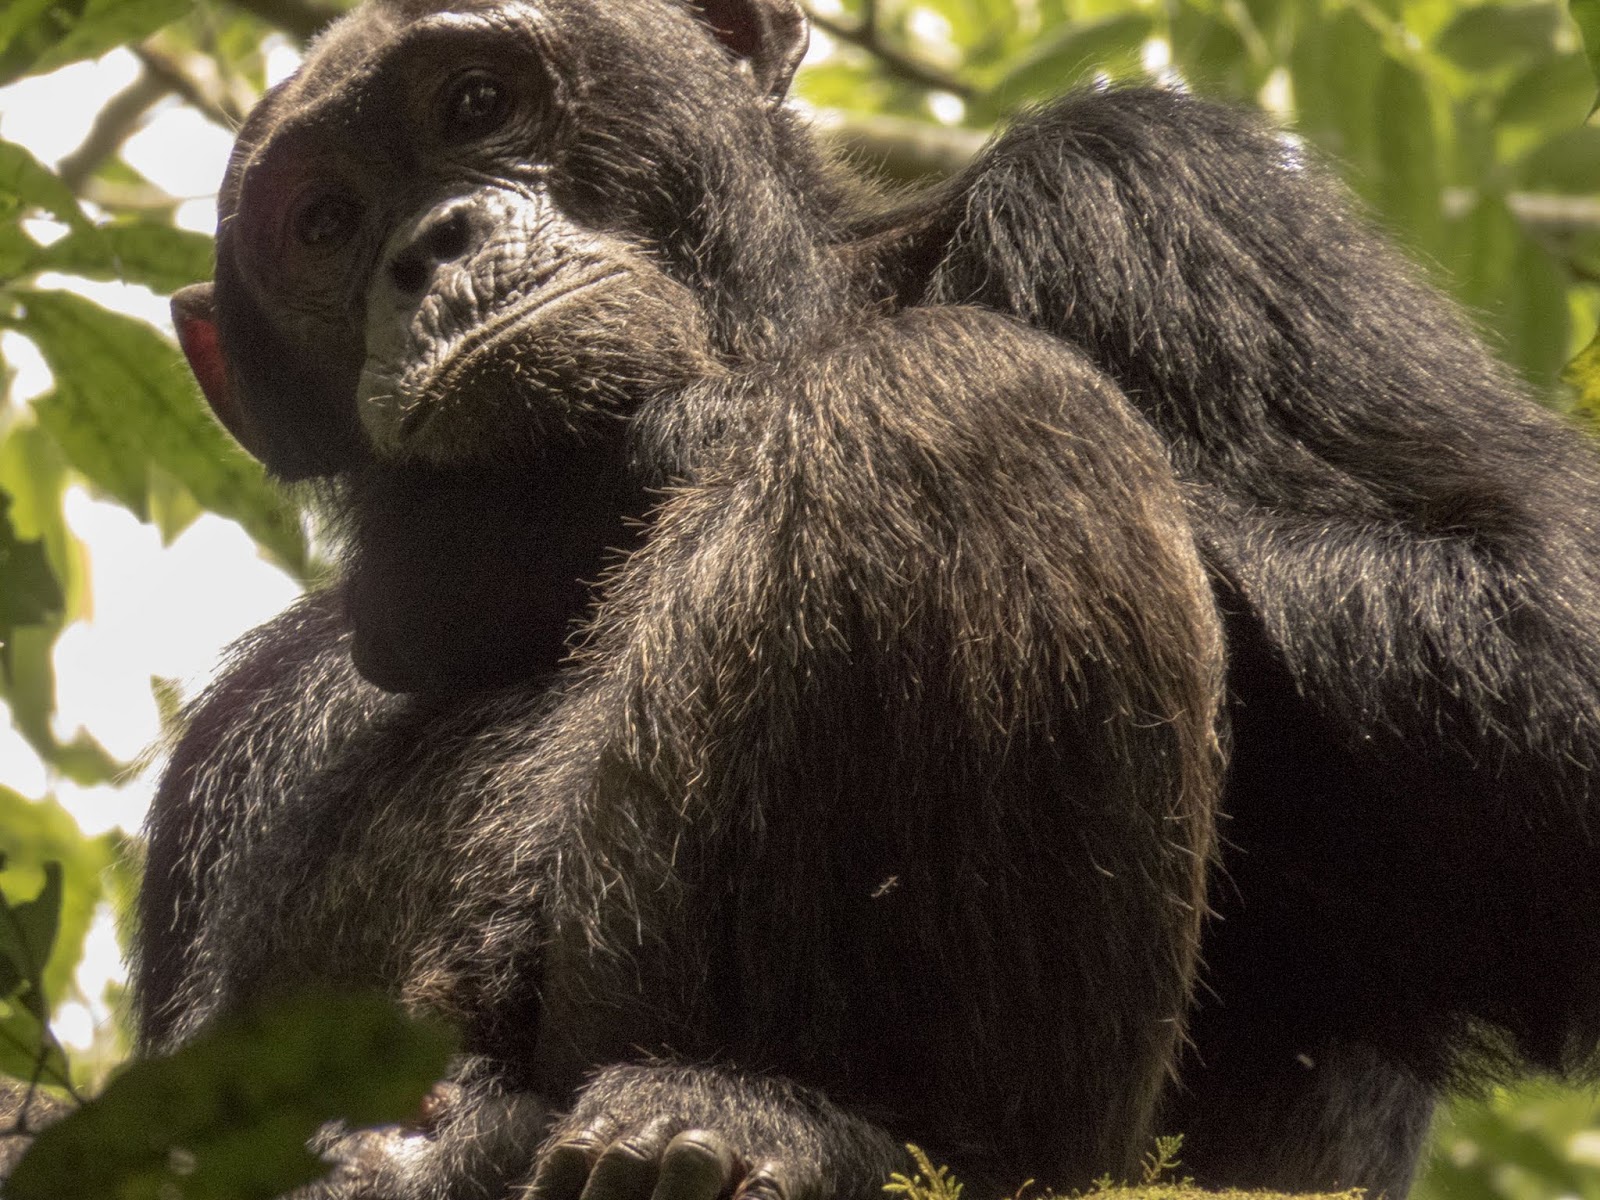 A Road Trip Tour of Uganda with Gorillas, Chimps, Birds, Hippos...and My Husband ...